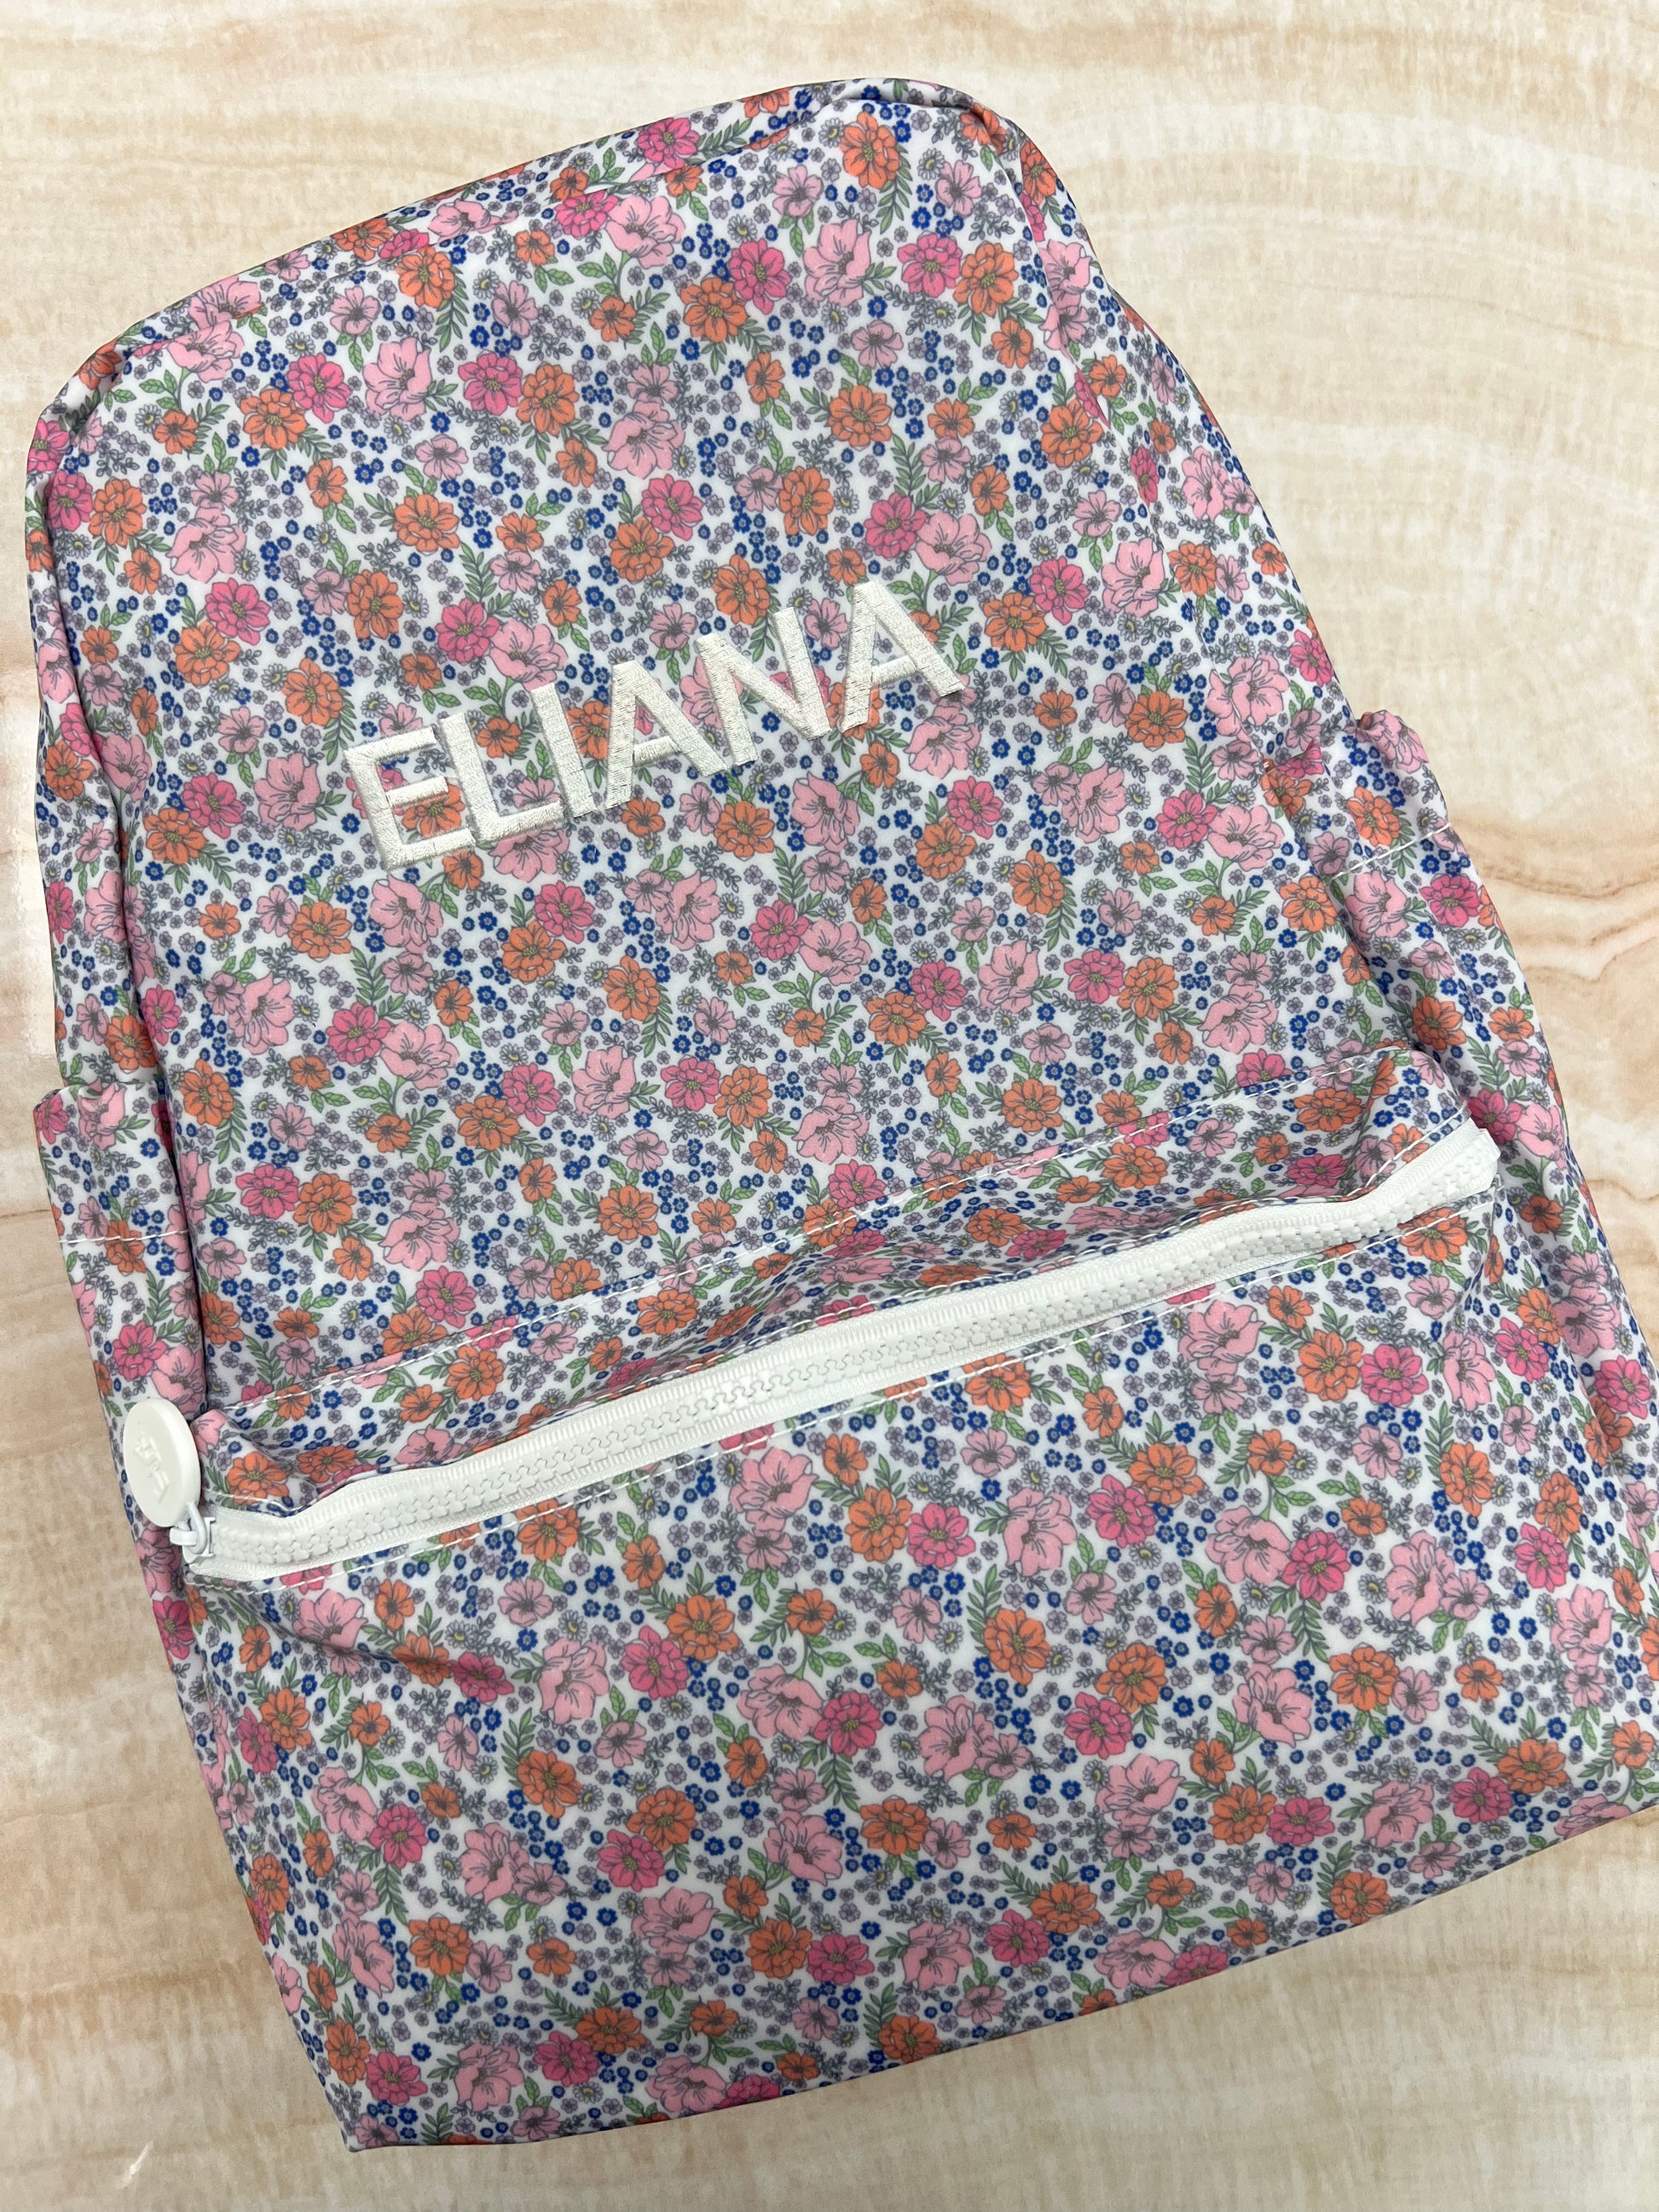 Personalized Nylon Floral Backpack - Give Wink